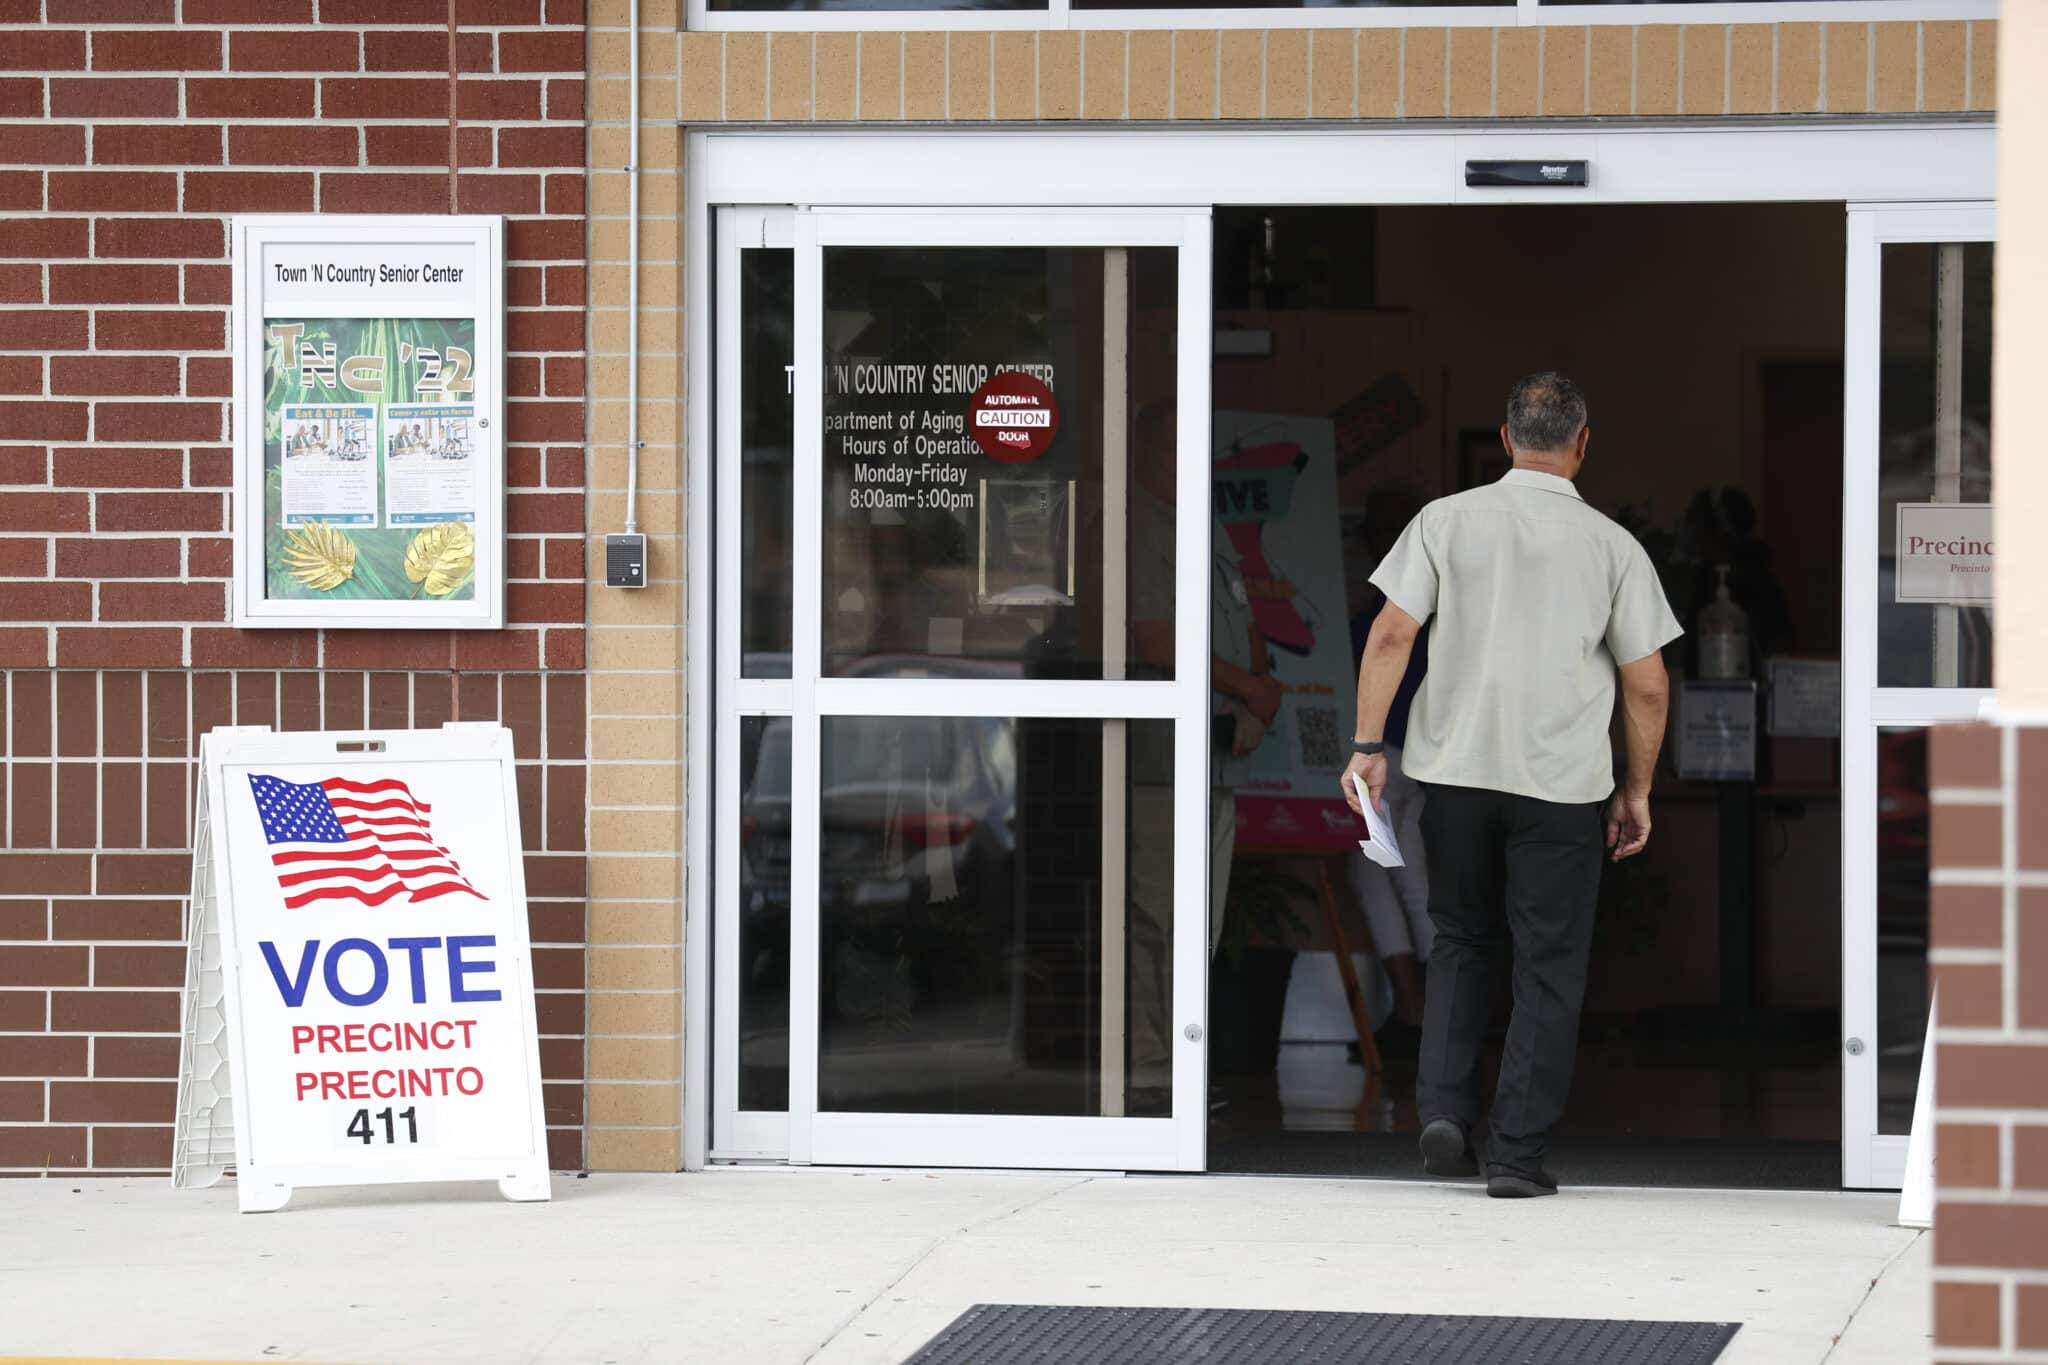 TAMPA, FL - AUGUST 23: Hillsborough County enter their polling place to cast their ballots on primary election day on August 23, 2022 in Tampa, Florida. Florida voters will head to the polls today to determine which candidates will have the chance to face off in this Novembers general election. (Photo by Octavio Jones/Getty Images)